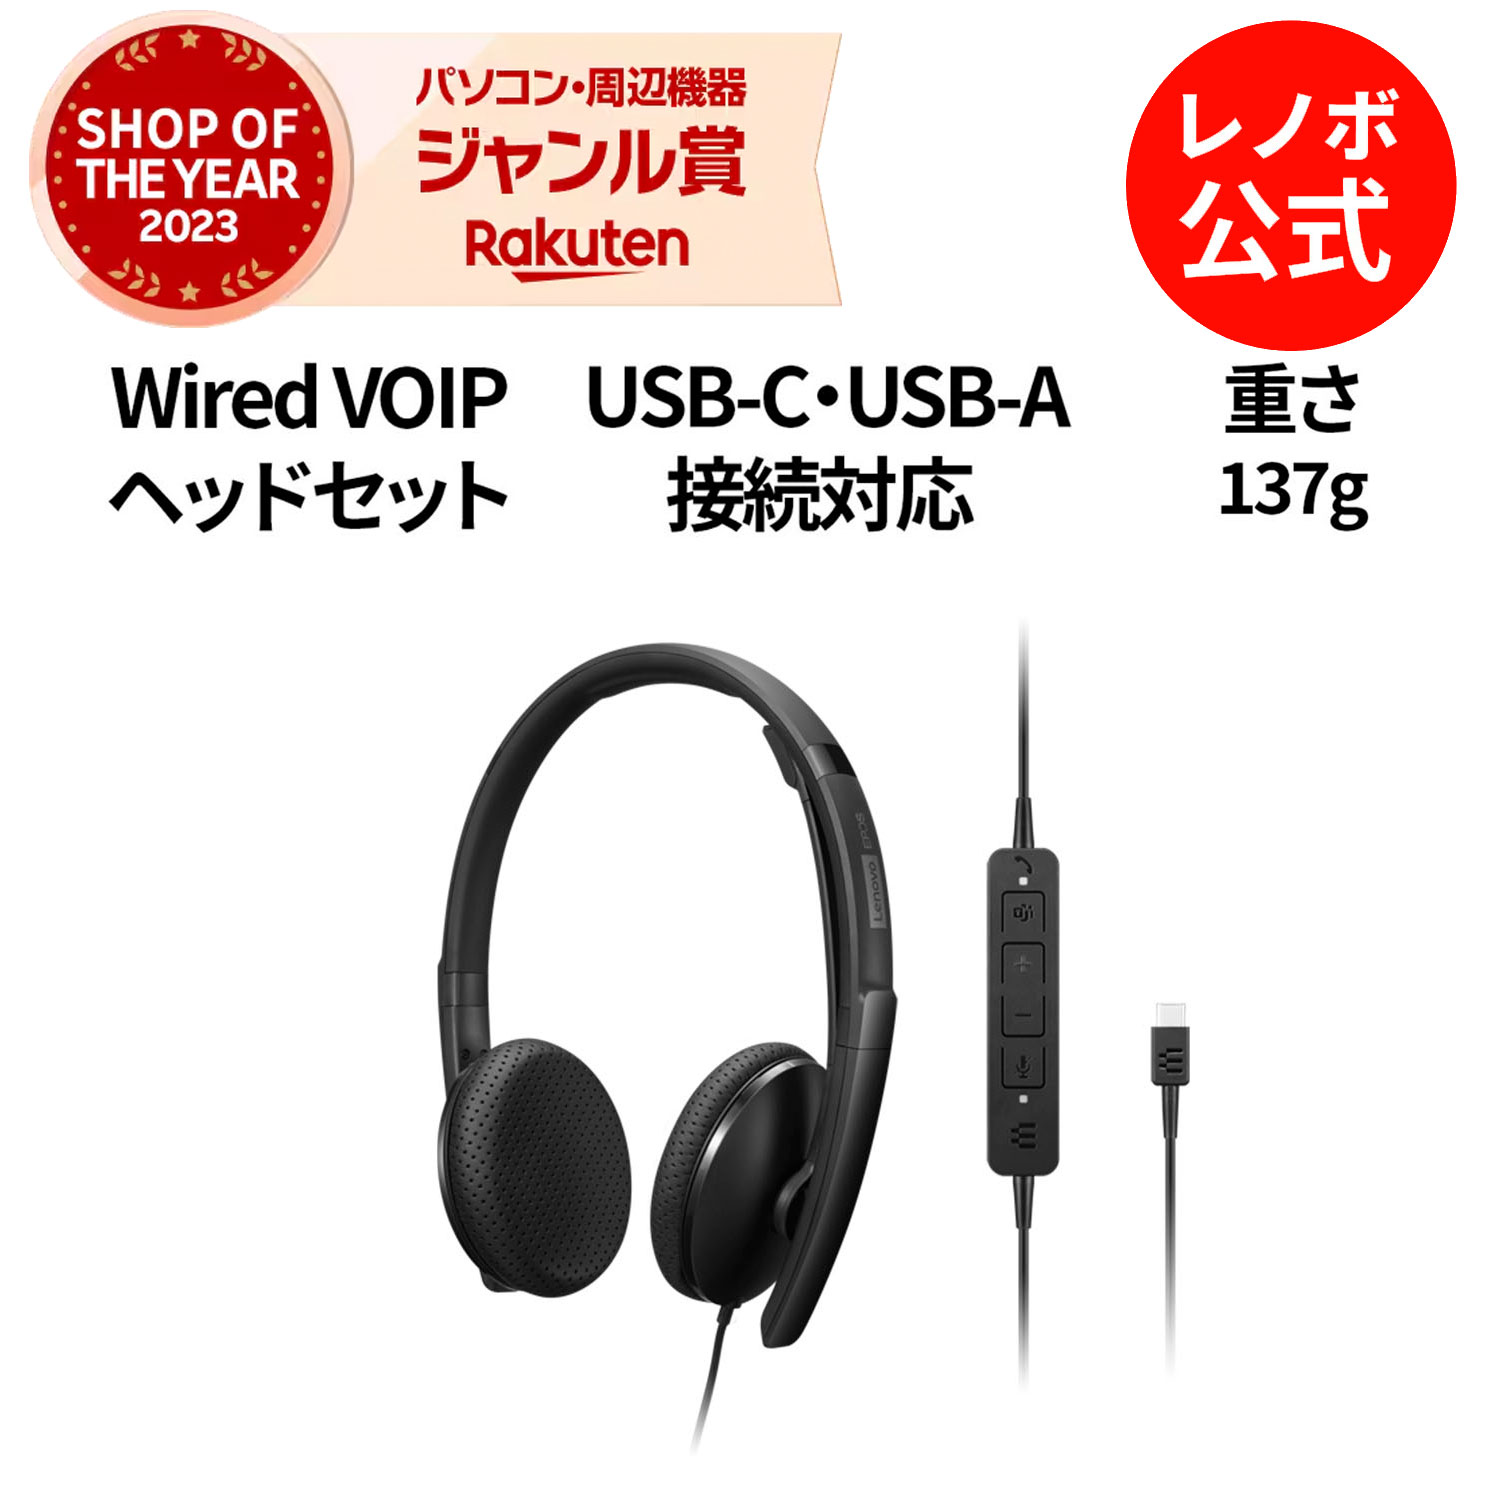 【5/28-6/3】P10倍！【短納期】純正 レノボ 国内正規品 レノボ公式 新生活 Lenovo Wired VOIP ヘッドセット(Teams)(4XD1M45626)